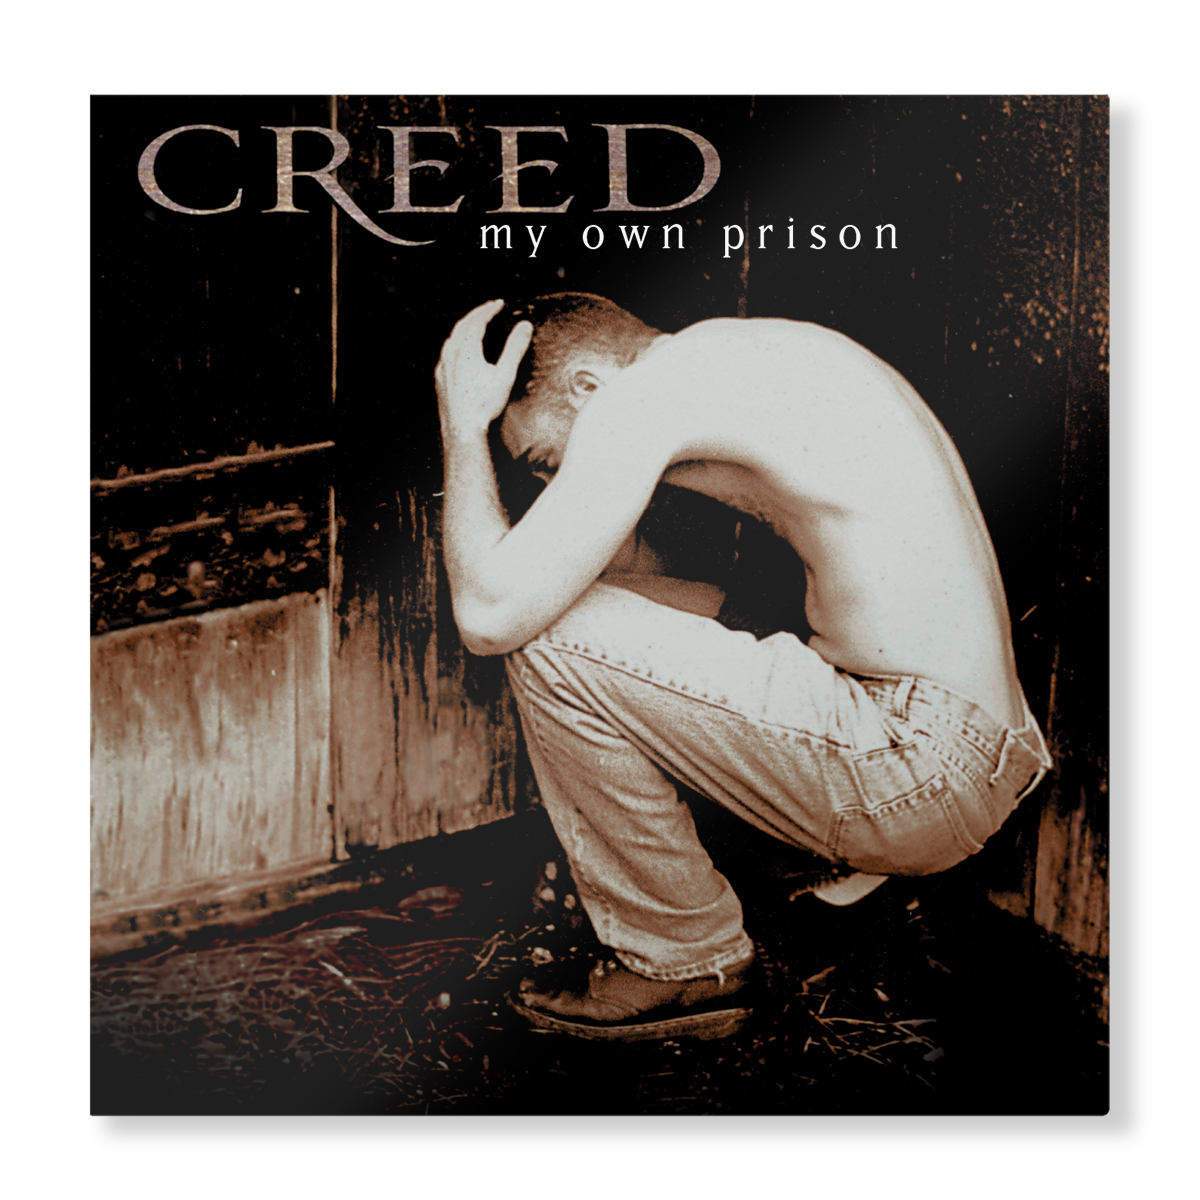 My Own Prison: 25th Anniversary Edition (Root Beer LP - Craft Exclusive)